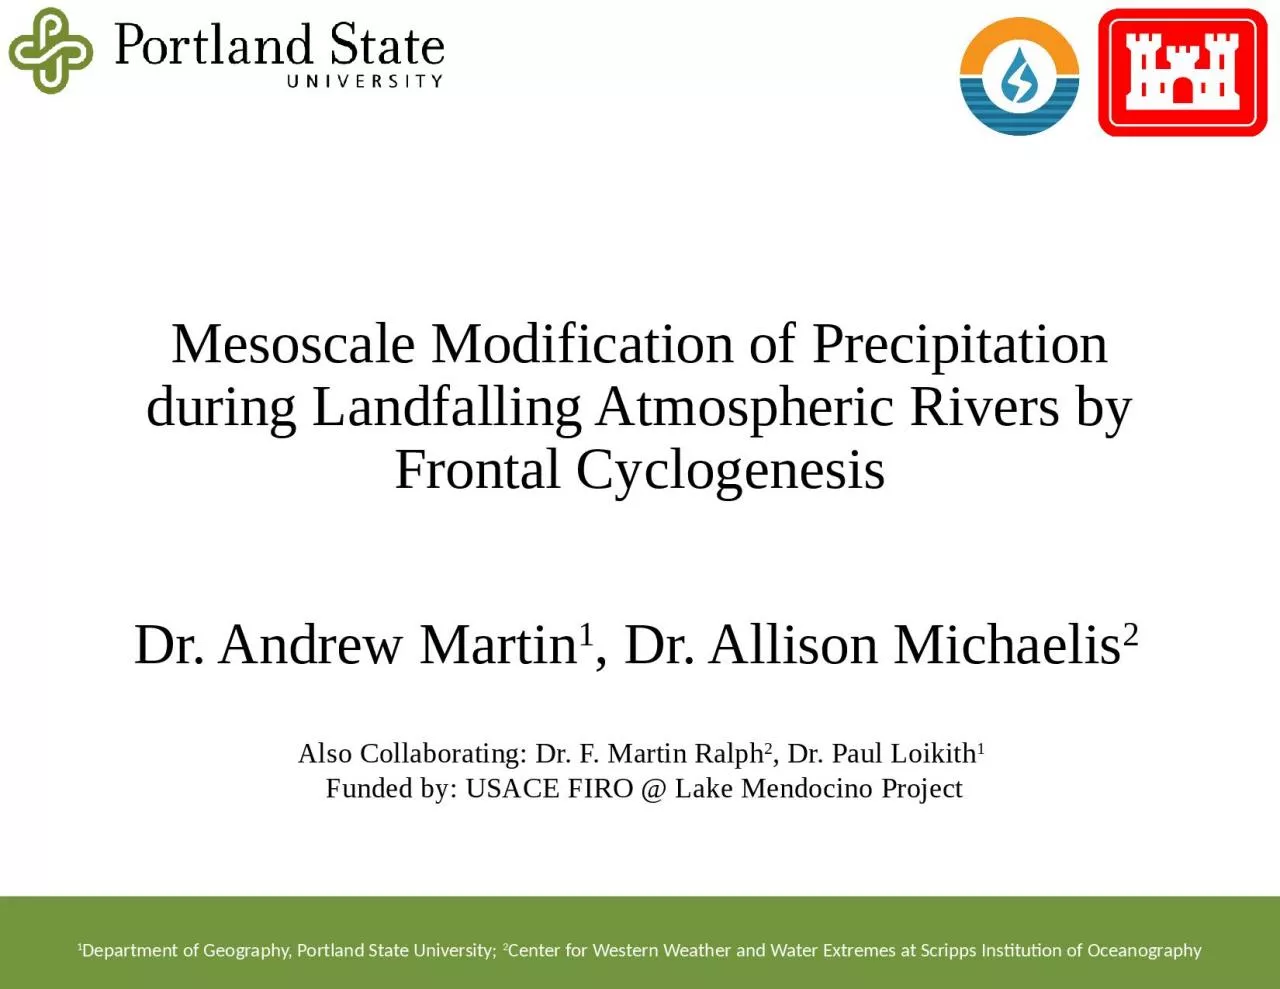 Mesoscale Modification of Precipitation during Landfalling Atmospheric Rivers by Frontal